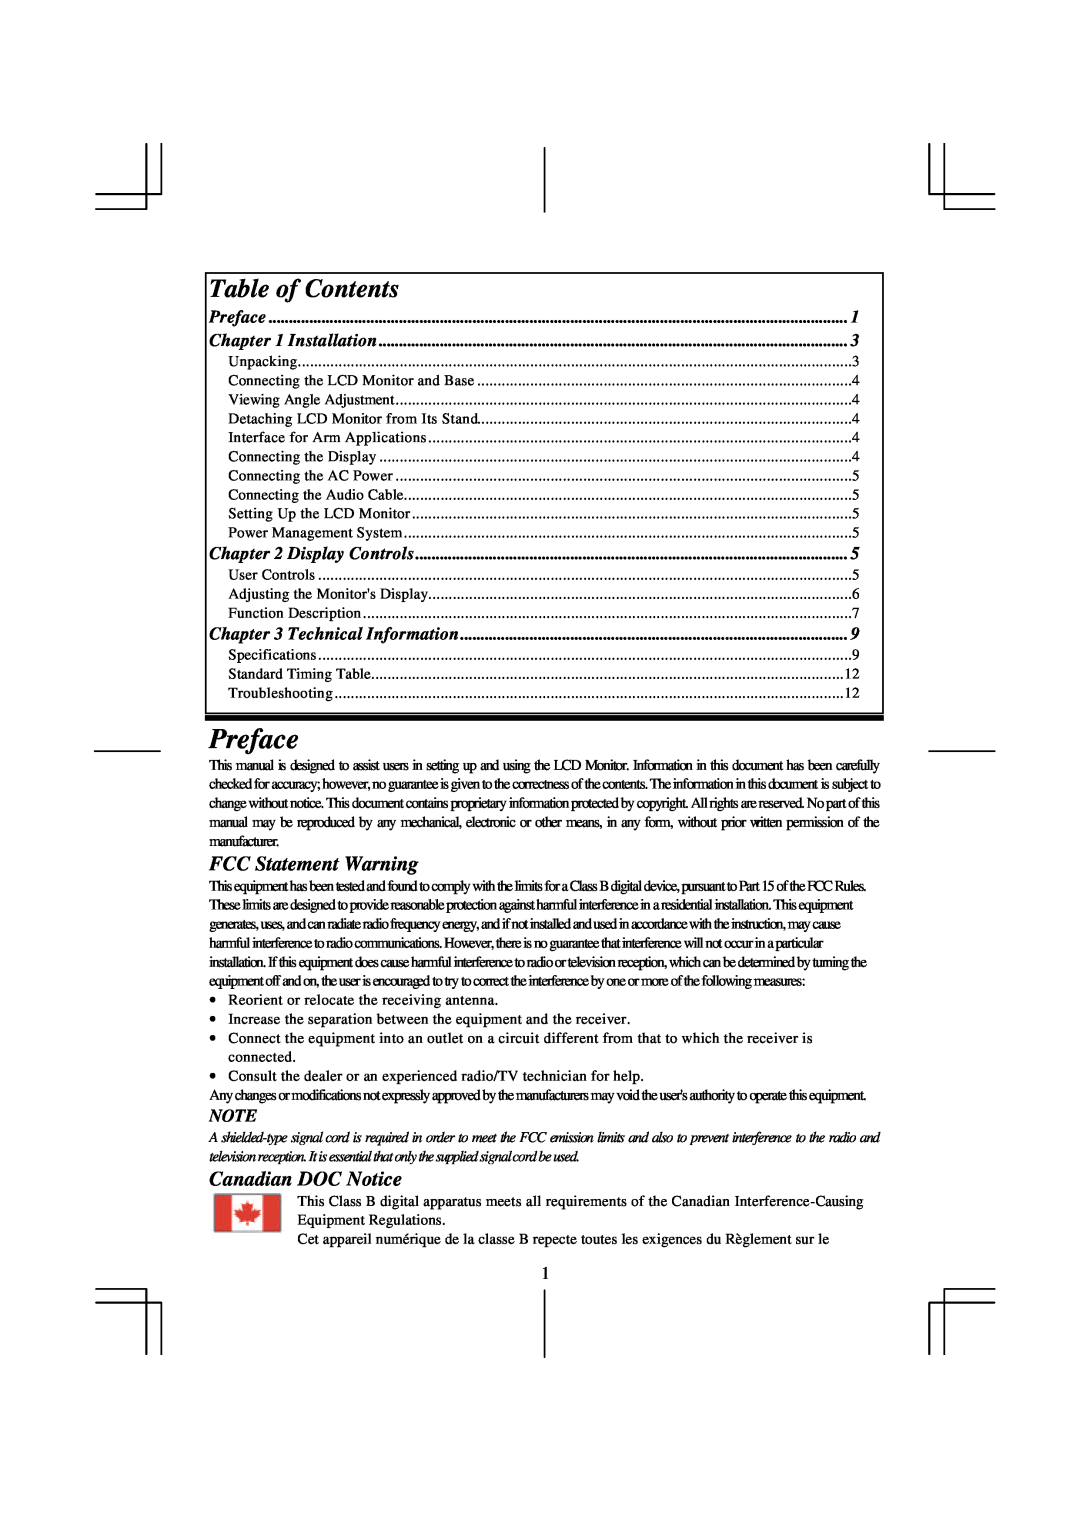 Acer AL 711 specifications Preface, FCC Statement Warning, Canadian DOC Notice, Table of Contents, Installation 